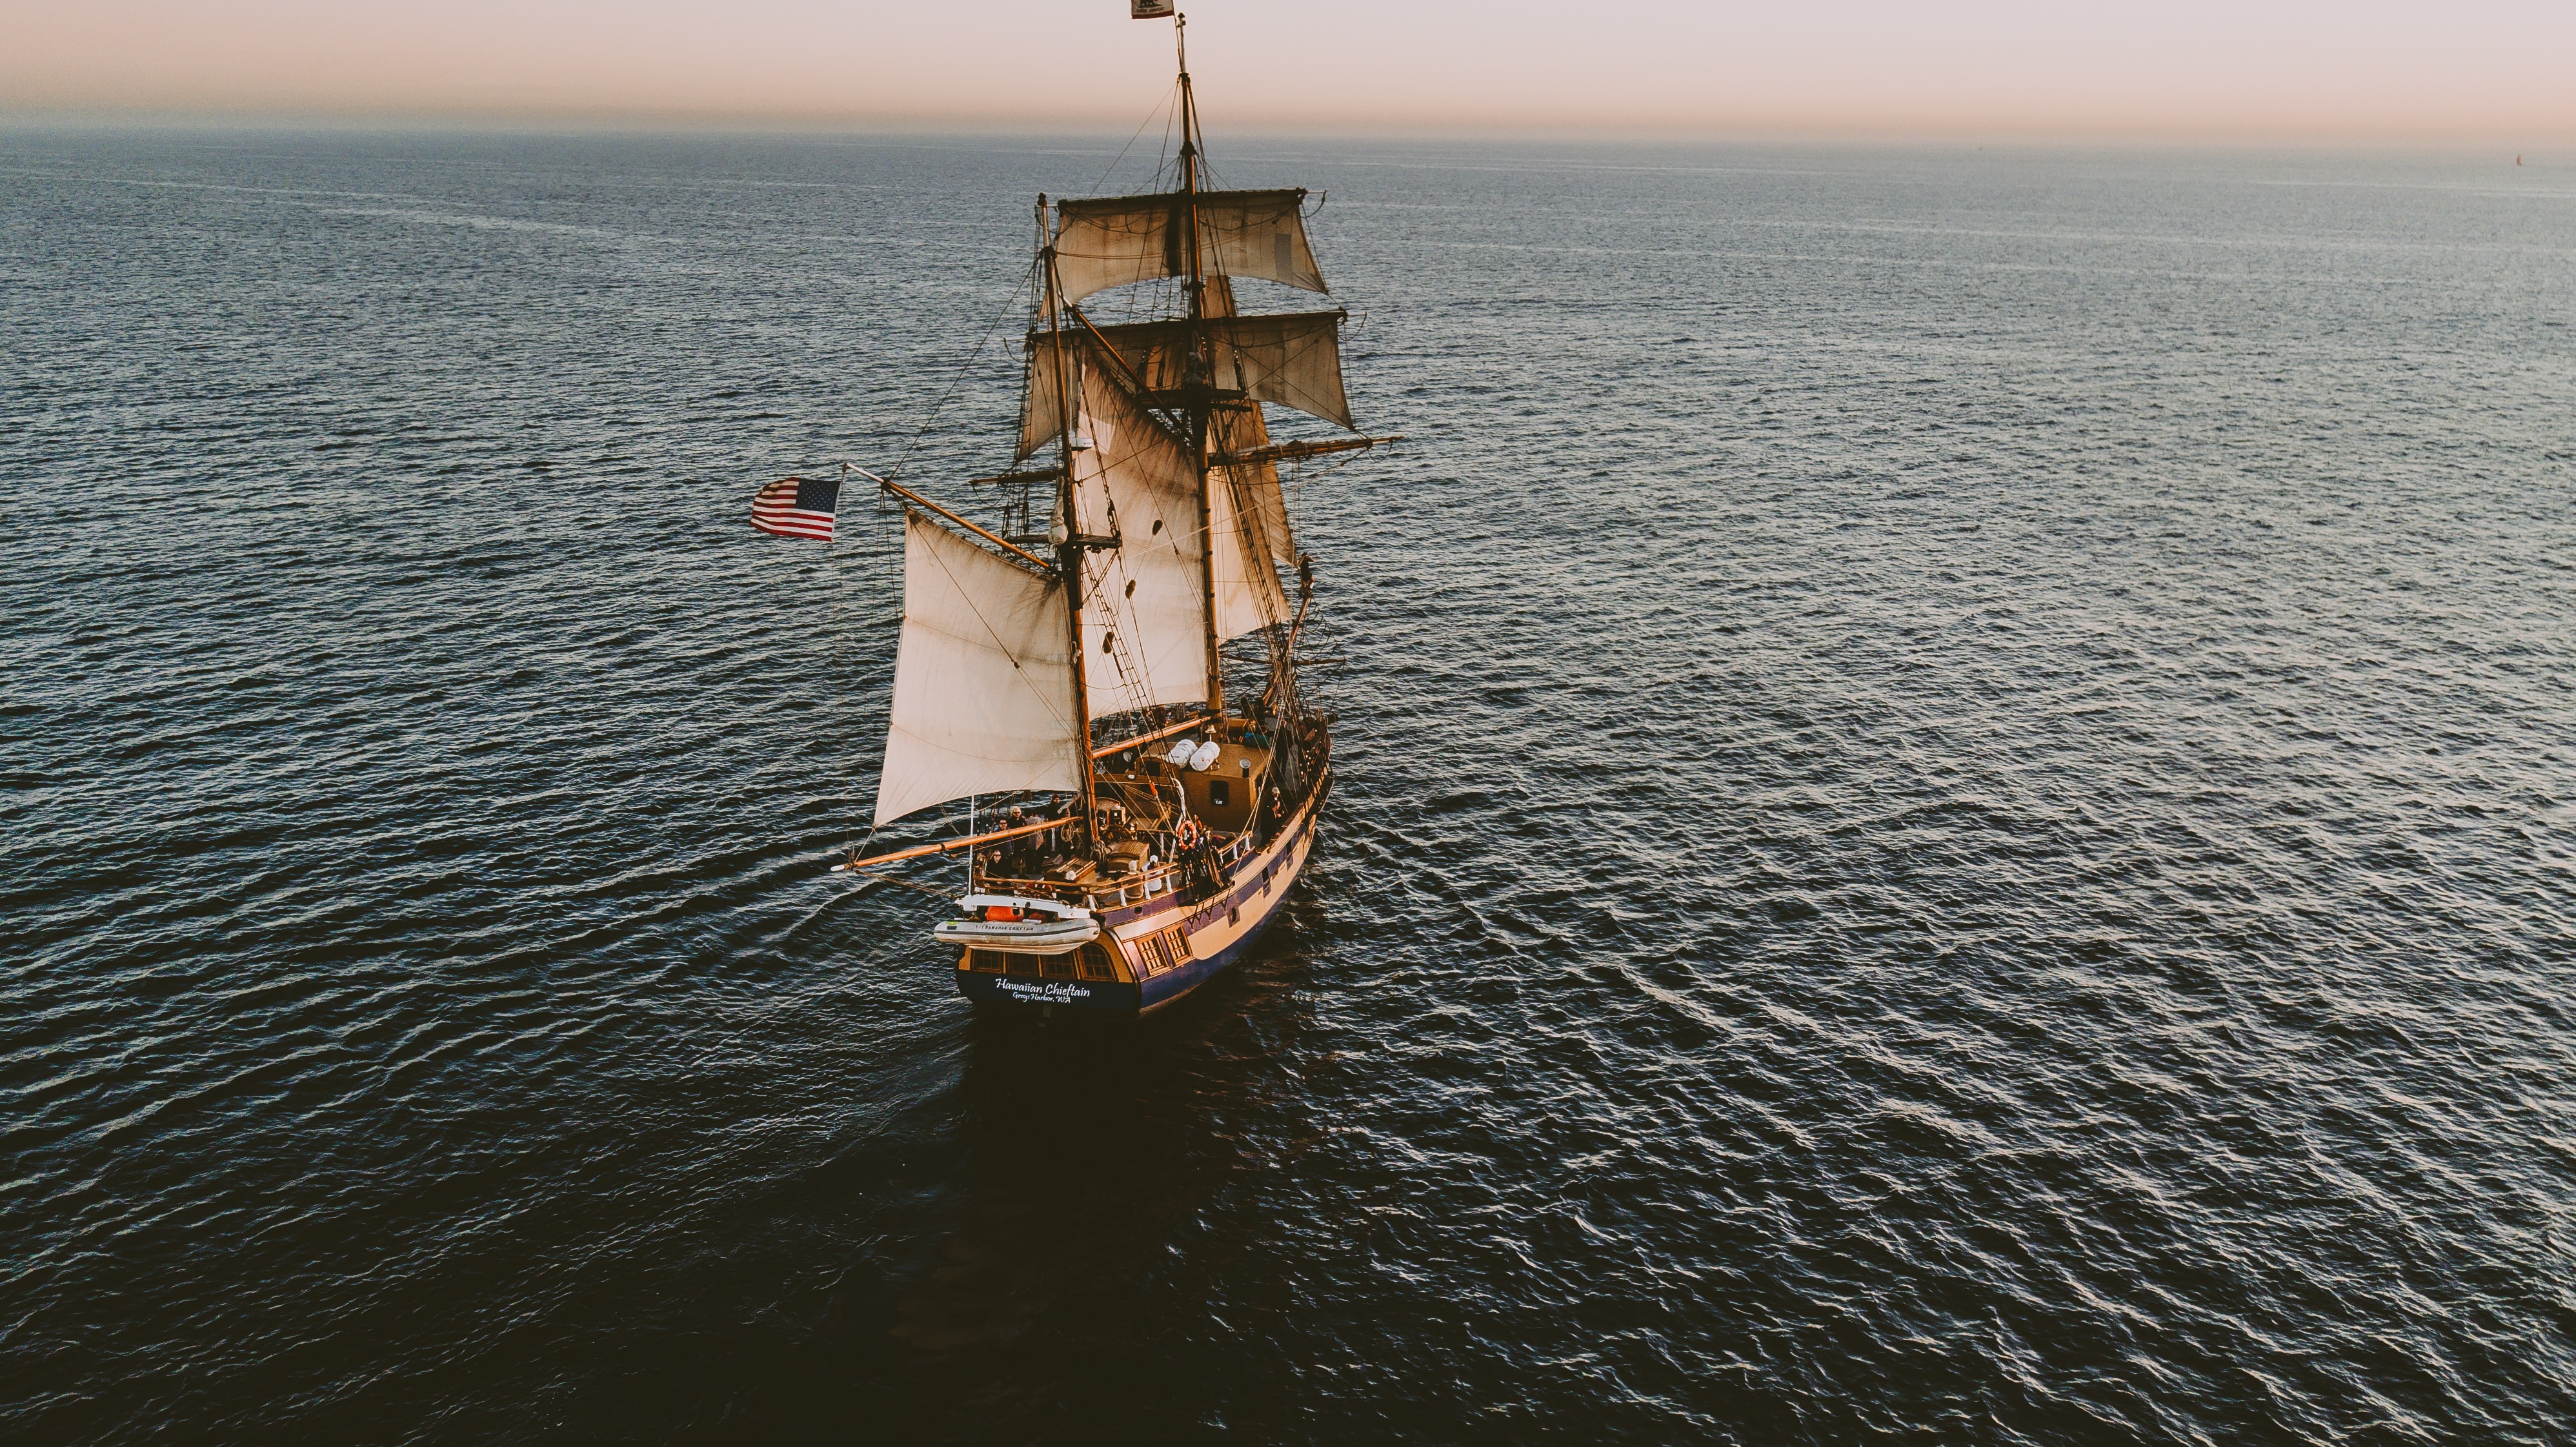 an old ship sailing on the ocean